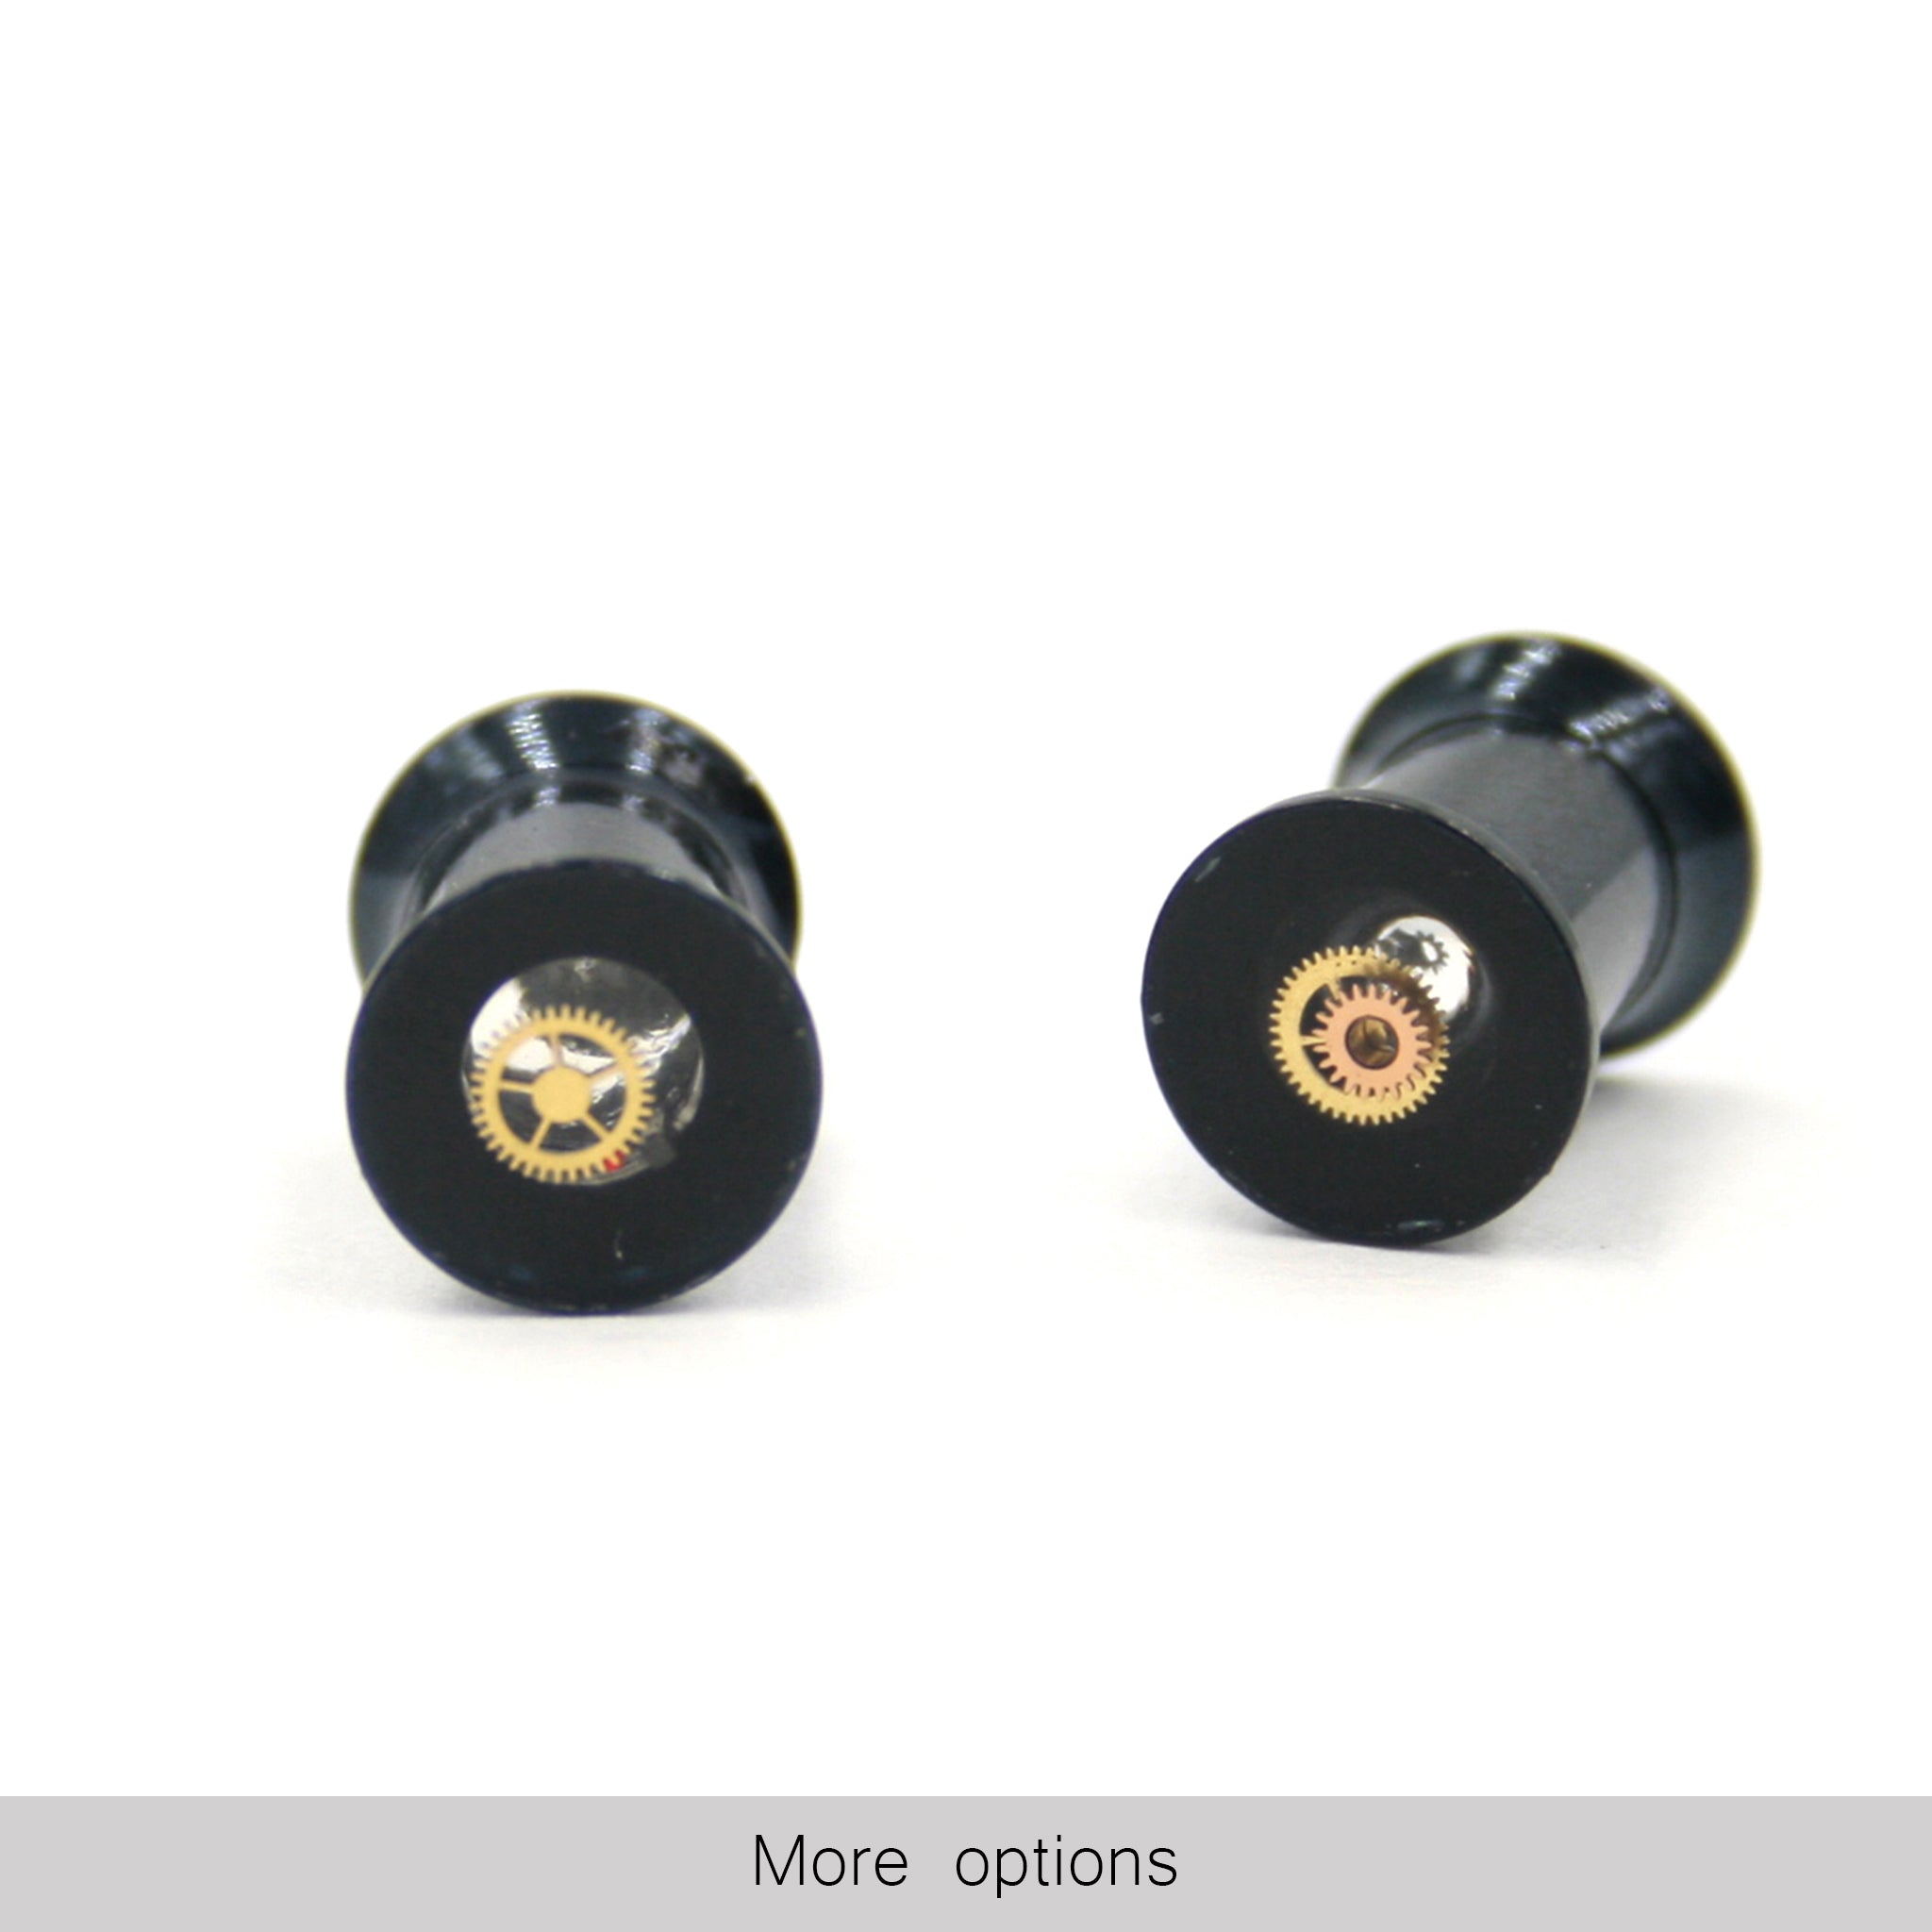 6mm double flare ear gauges in steampunk style